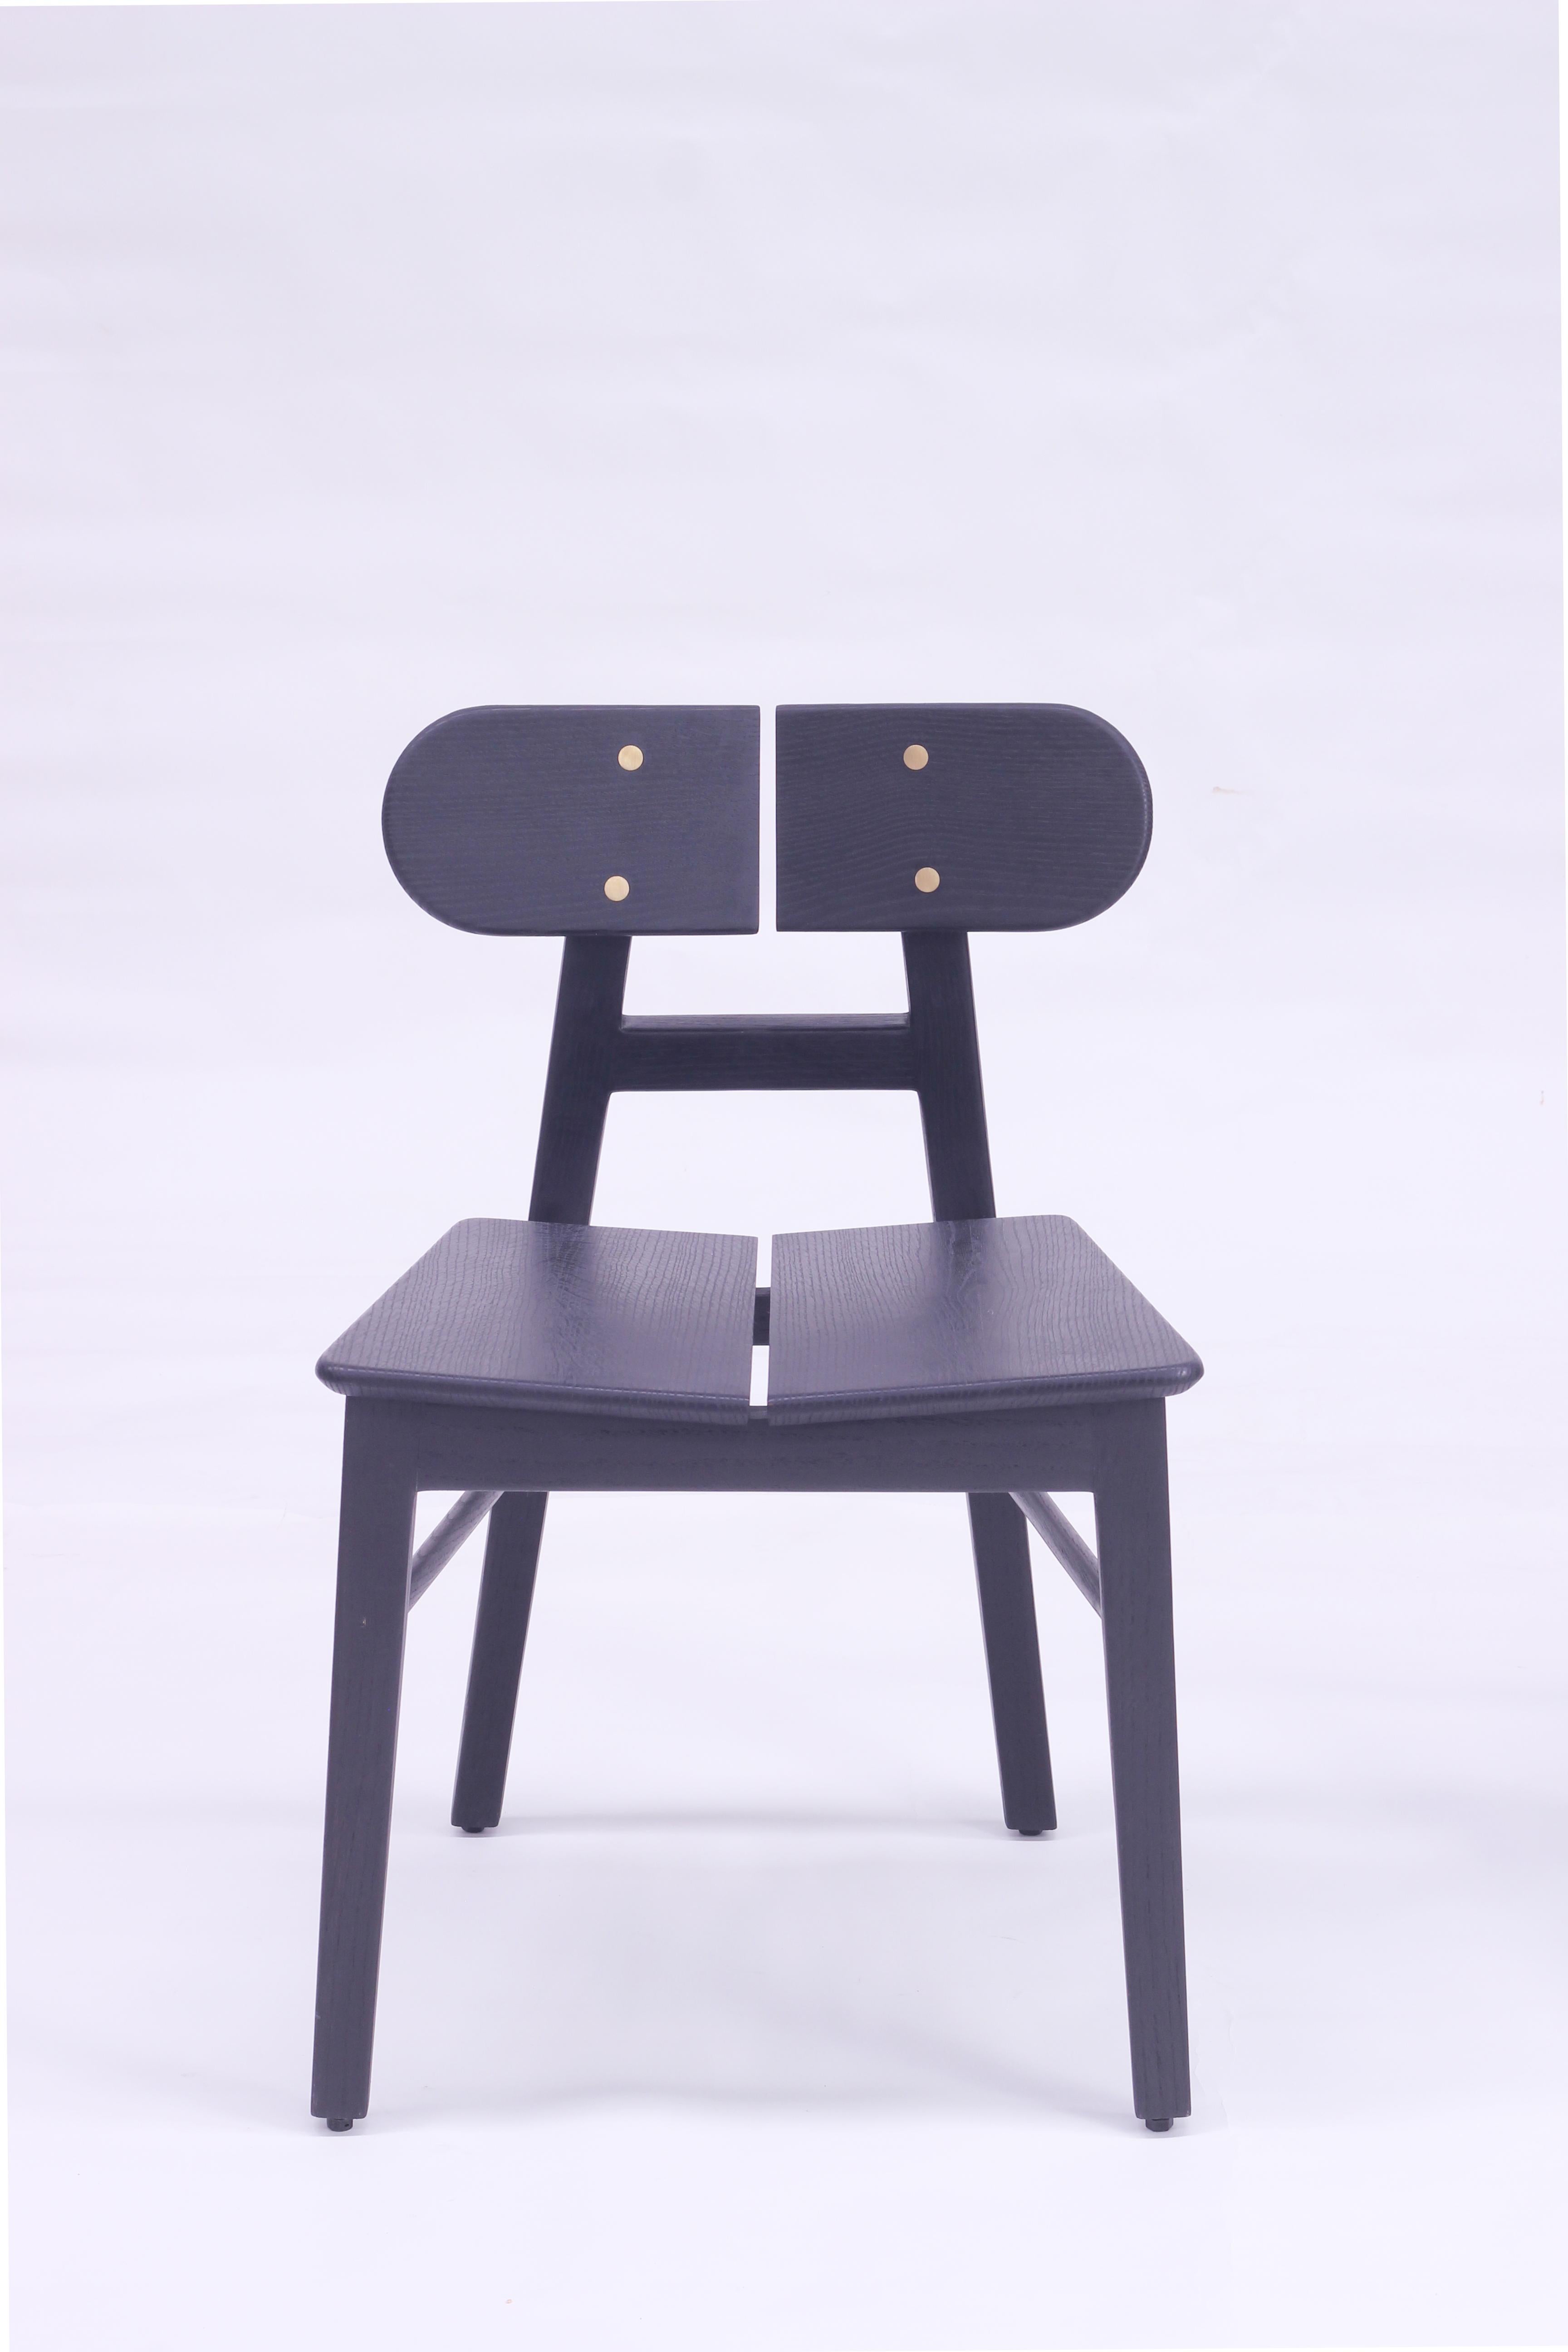 A Solid wood chair crafted for comfort and a timeless aesthetic, the BUTTERFLY chair design is inspired by the beauty of a butterfly and developed through a design philosophy of conscious minimalism. The black solid wood chair makes a sophisticated